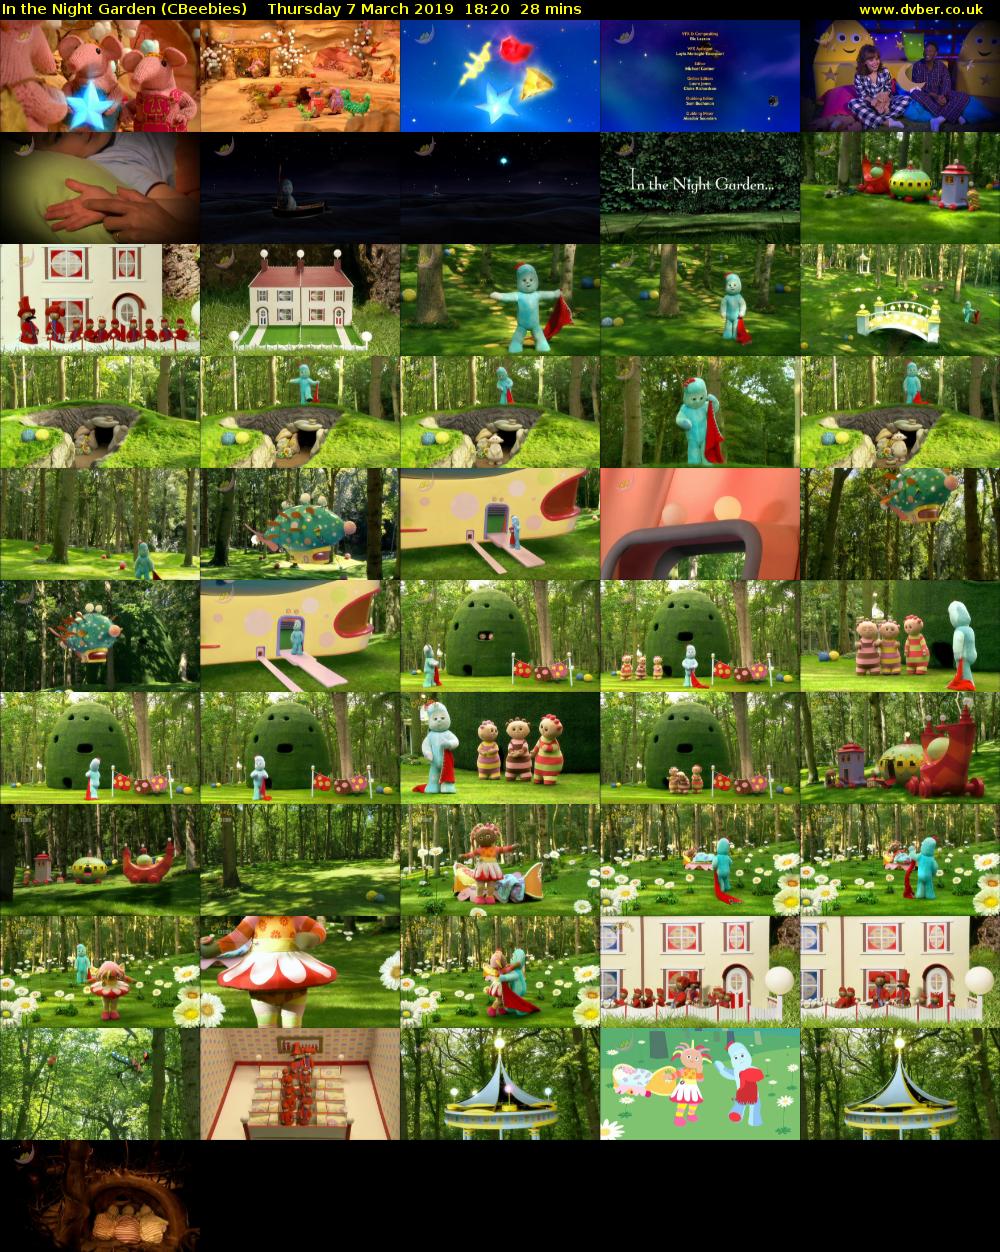 In the Night Garden (CBeebies) Thursday 7 March 2019 18:20 - 18:48